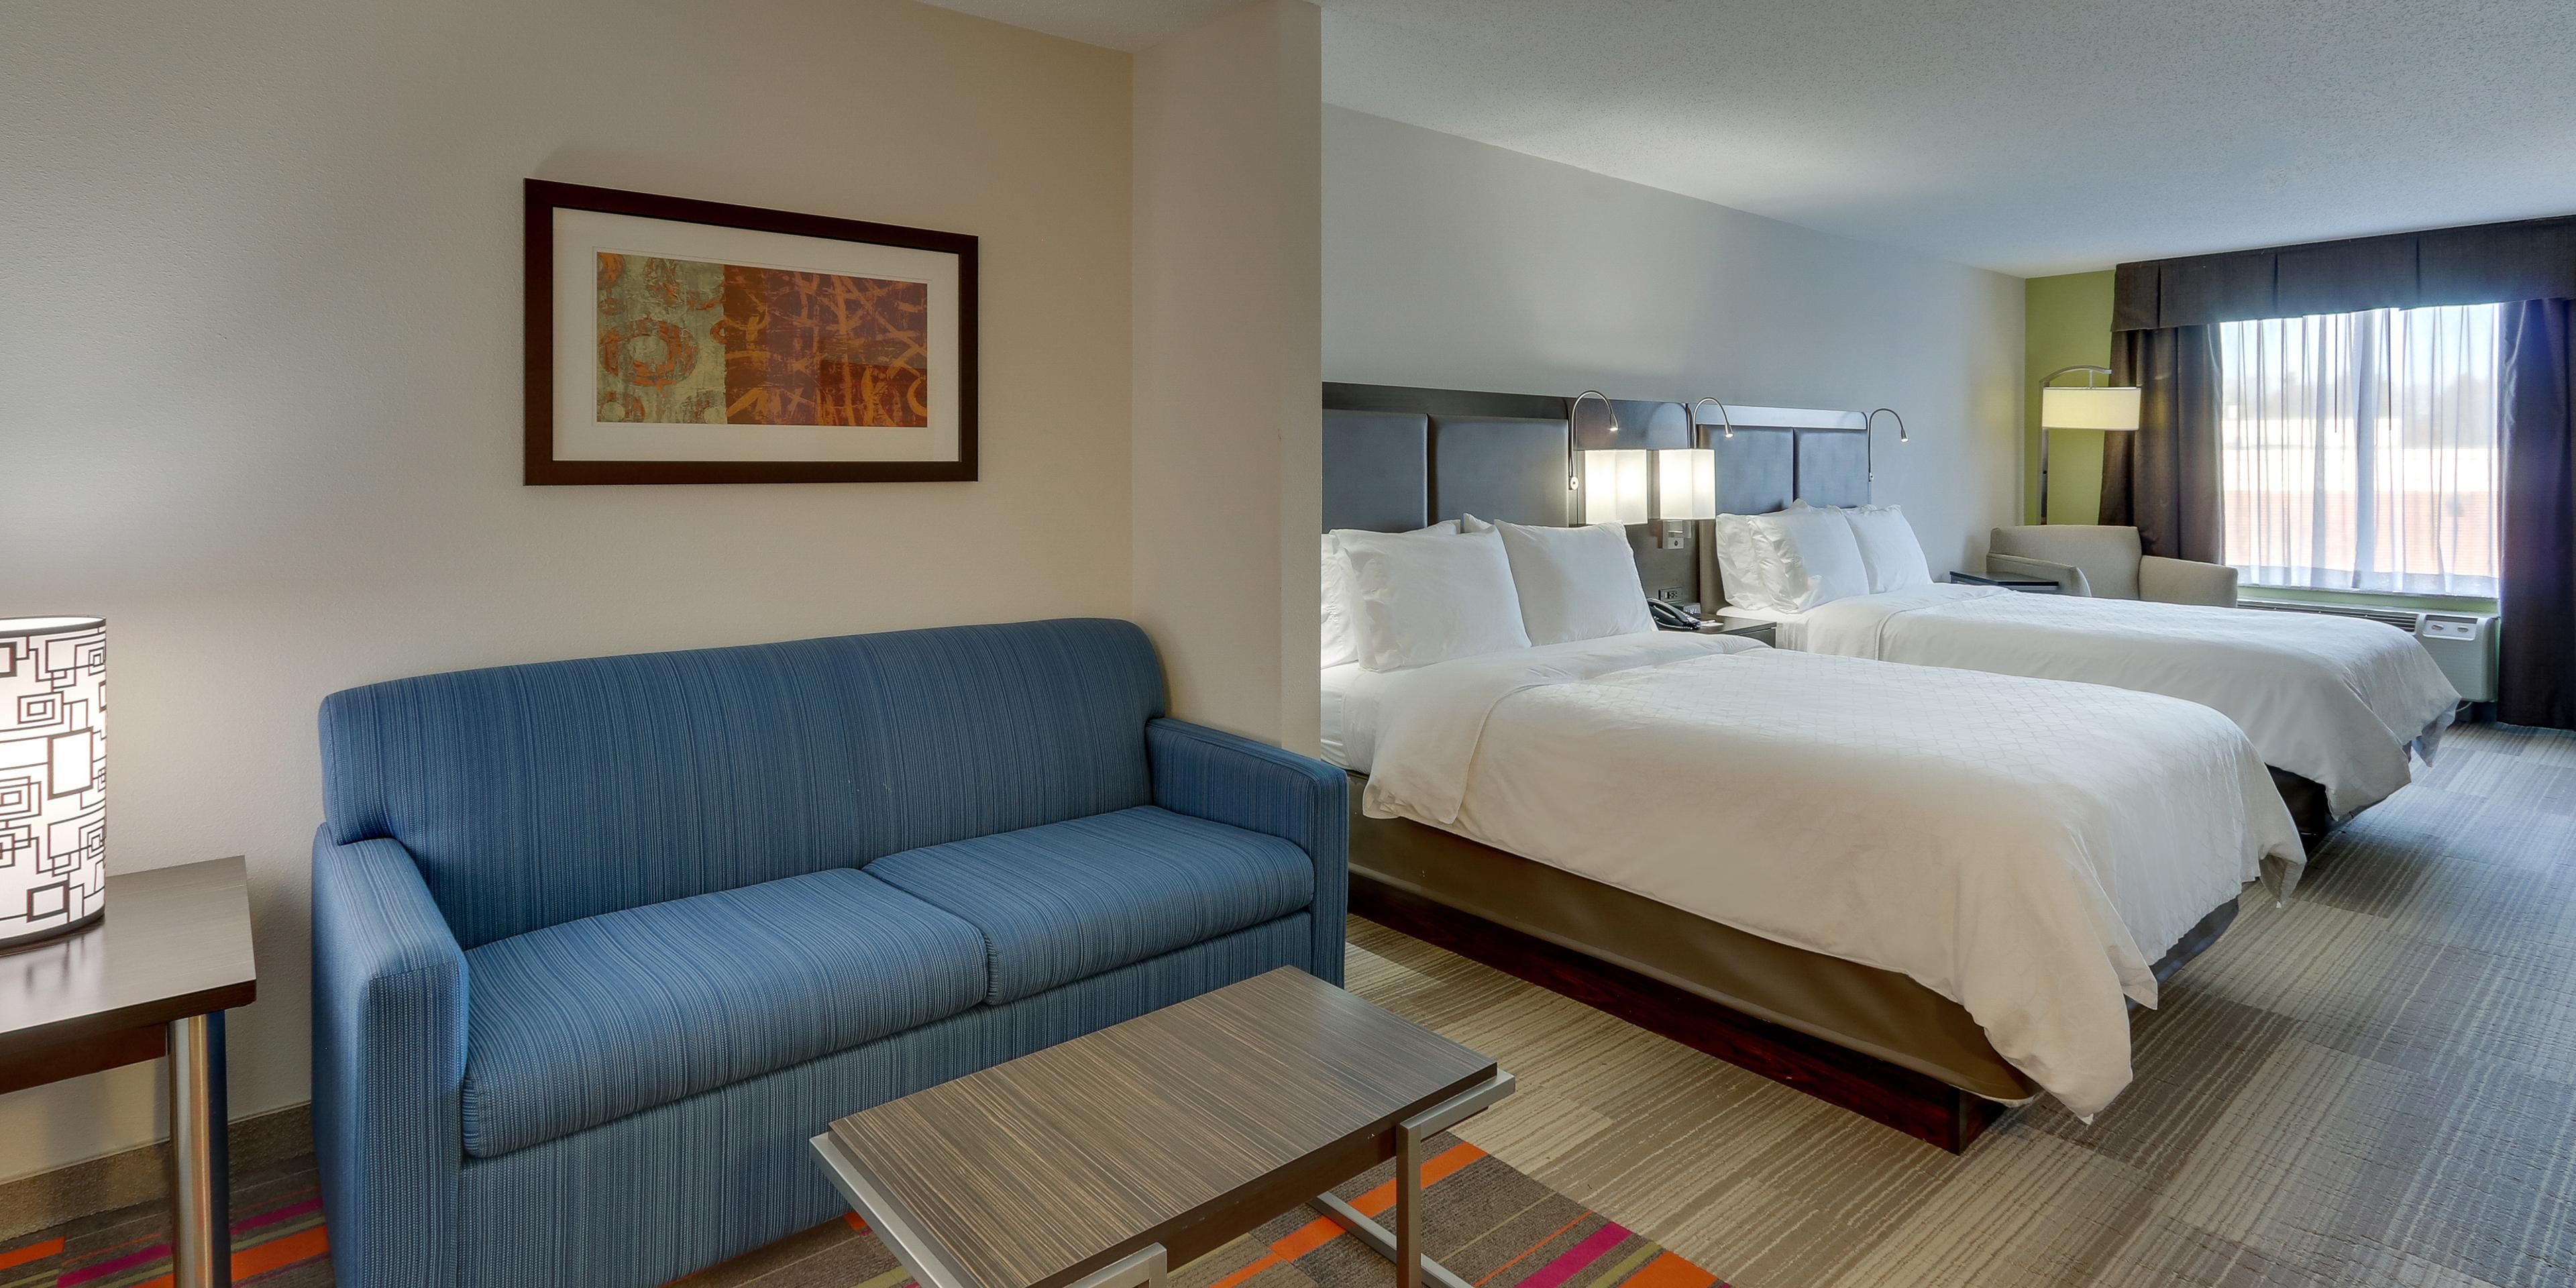 Come see for your self! Our newly renovated hotel features all new, spacious and modern guest rooms.  